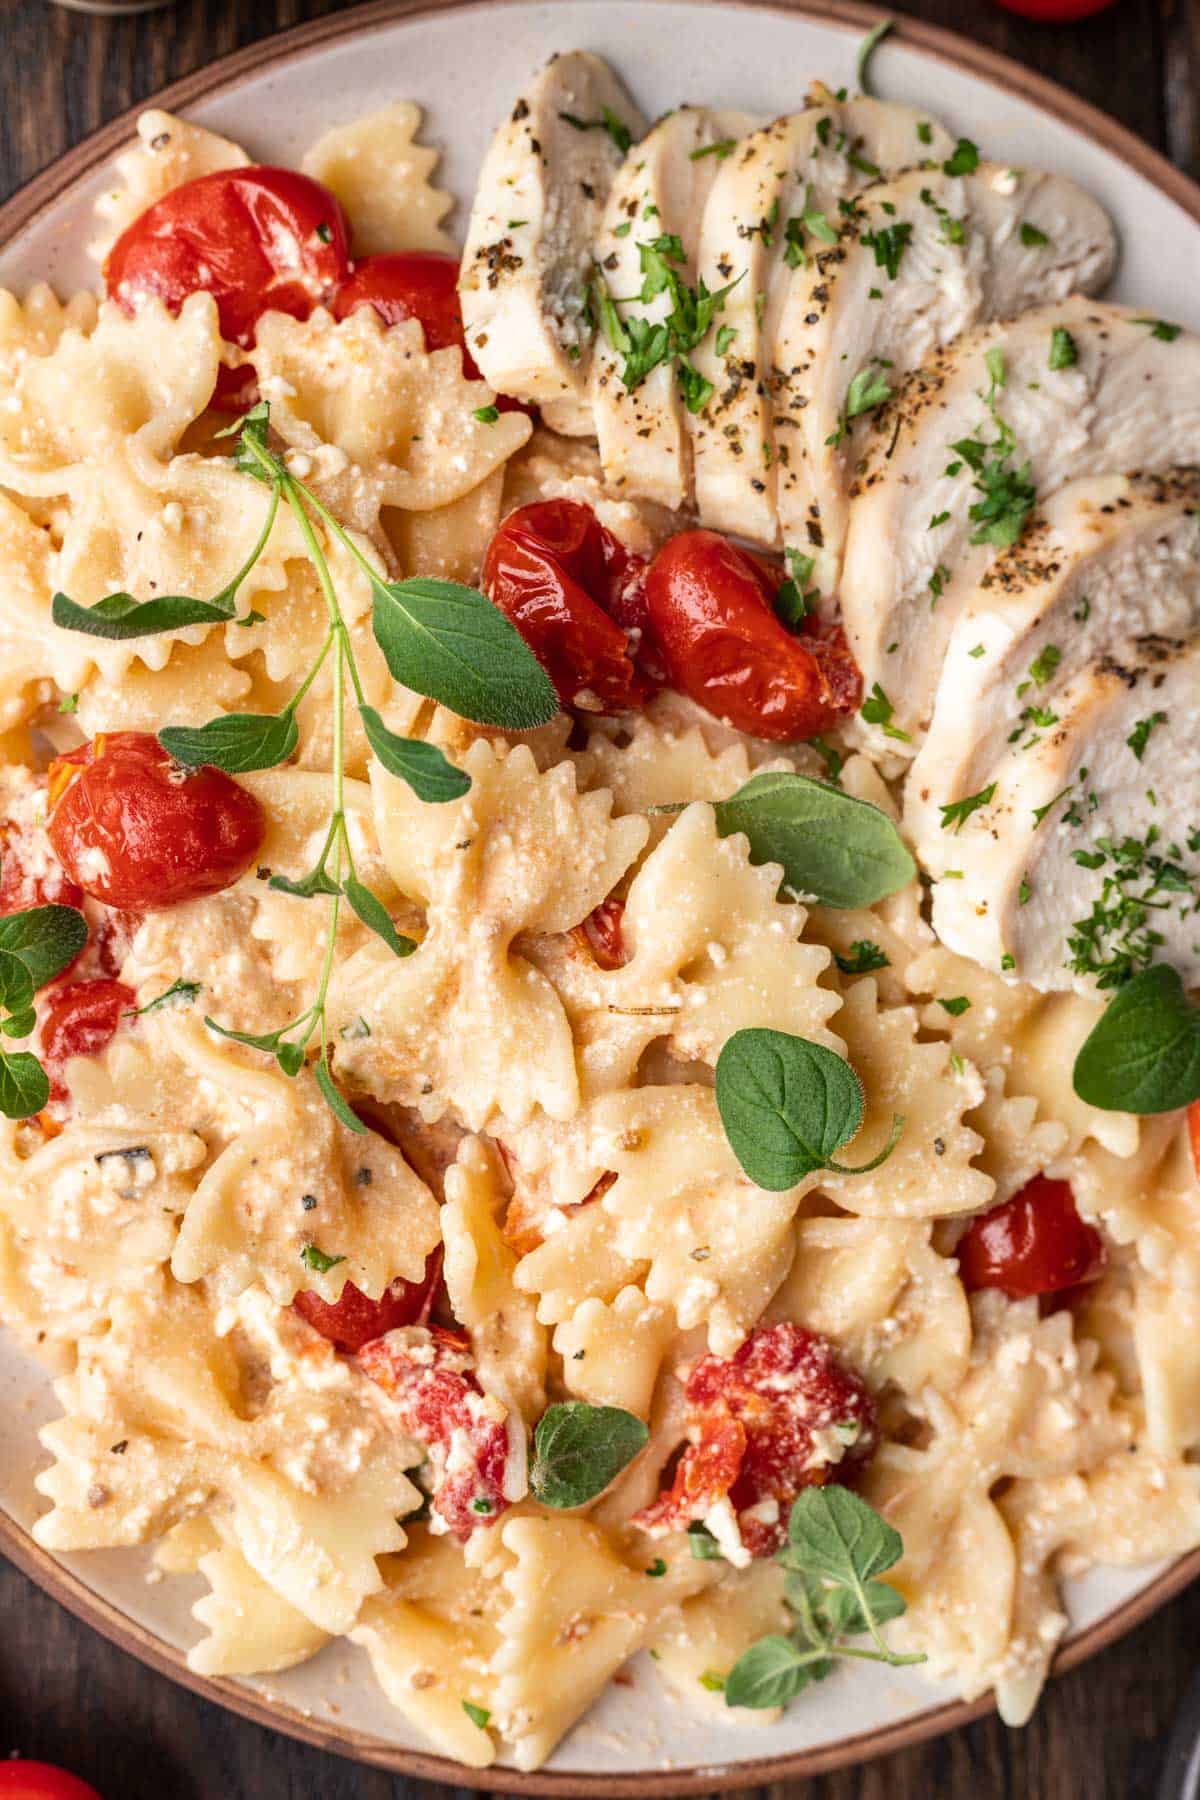 Bow ties noodles, cherry tomatoes, chicken, and fresh basil combined to make chicken feta pasta.